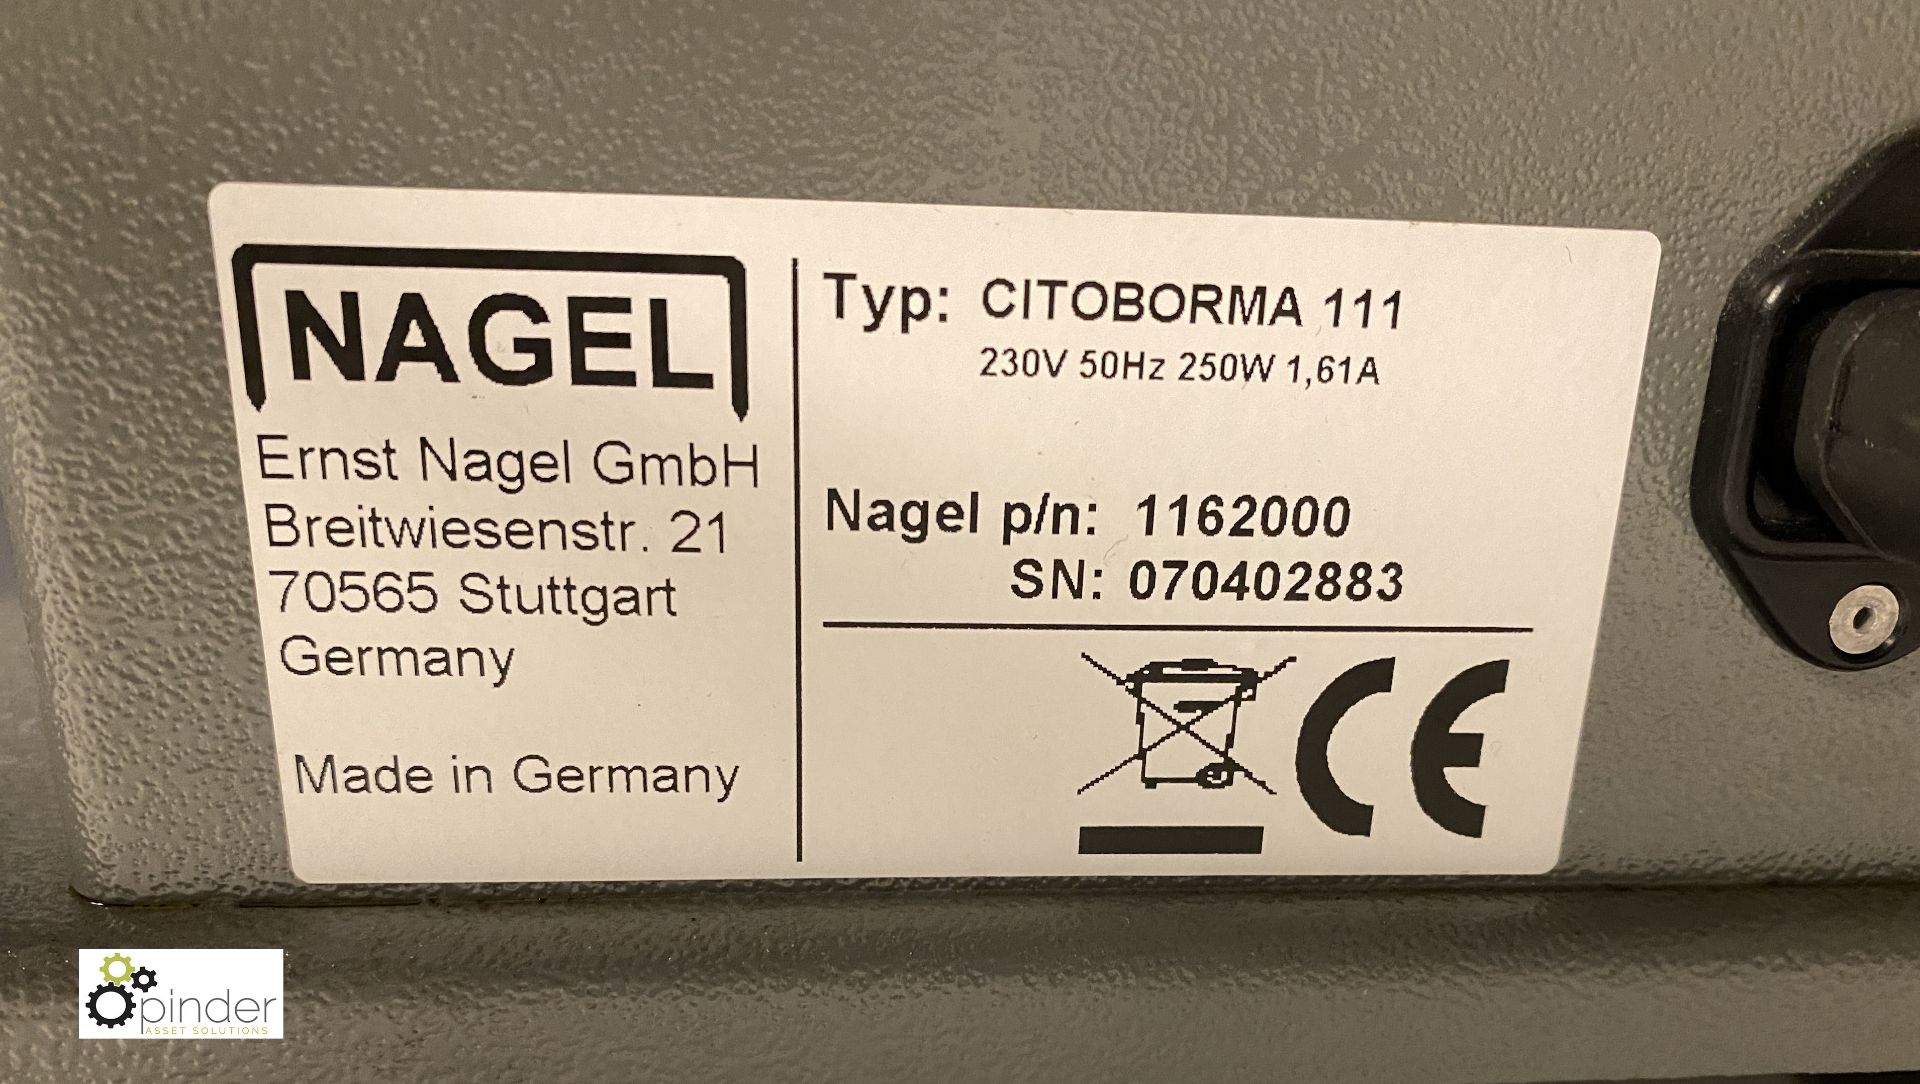 Nagal Citoborma III single hole Paper Drill, 240volts, serial number 070402883 - Image 4 of 4